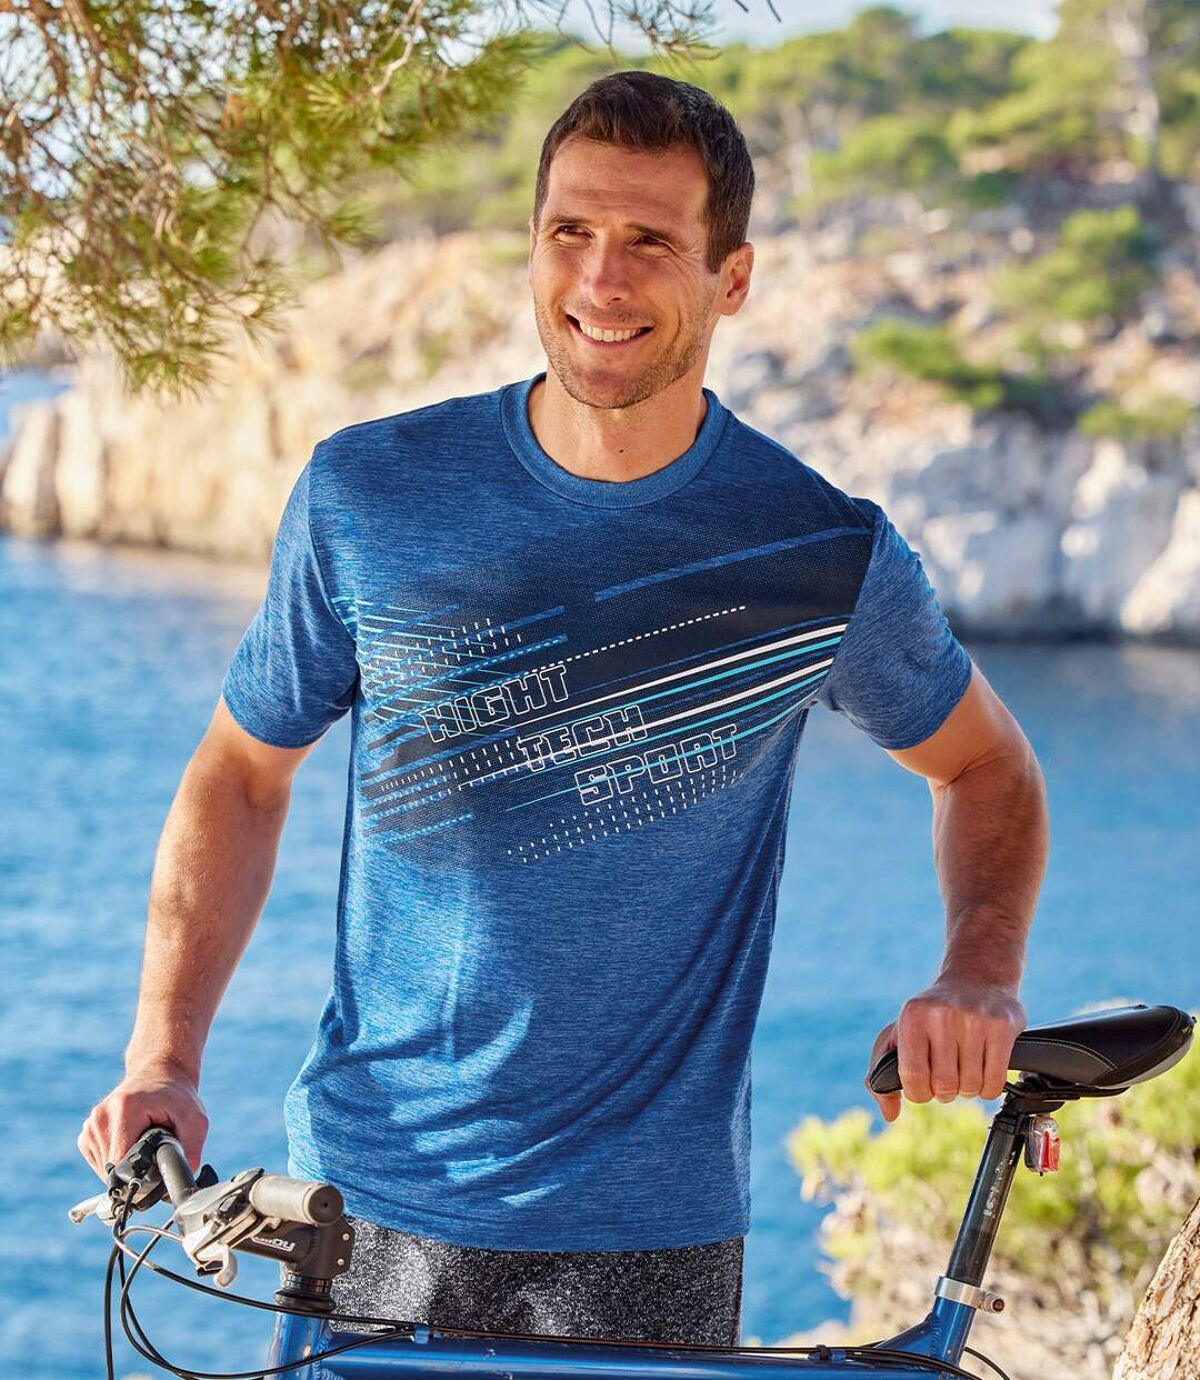 Pack of 3 Men's Sporty T-Shirts - Blue Grey Turquoise Atlas For Men